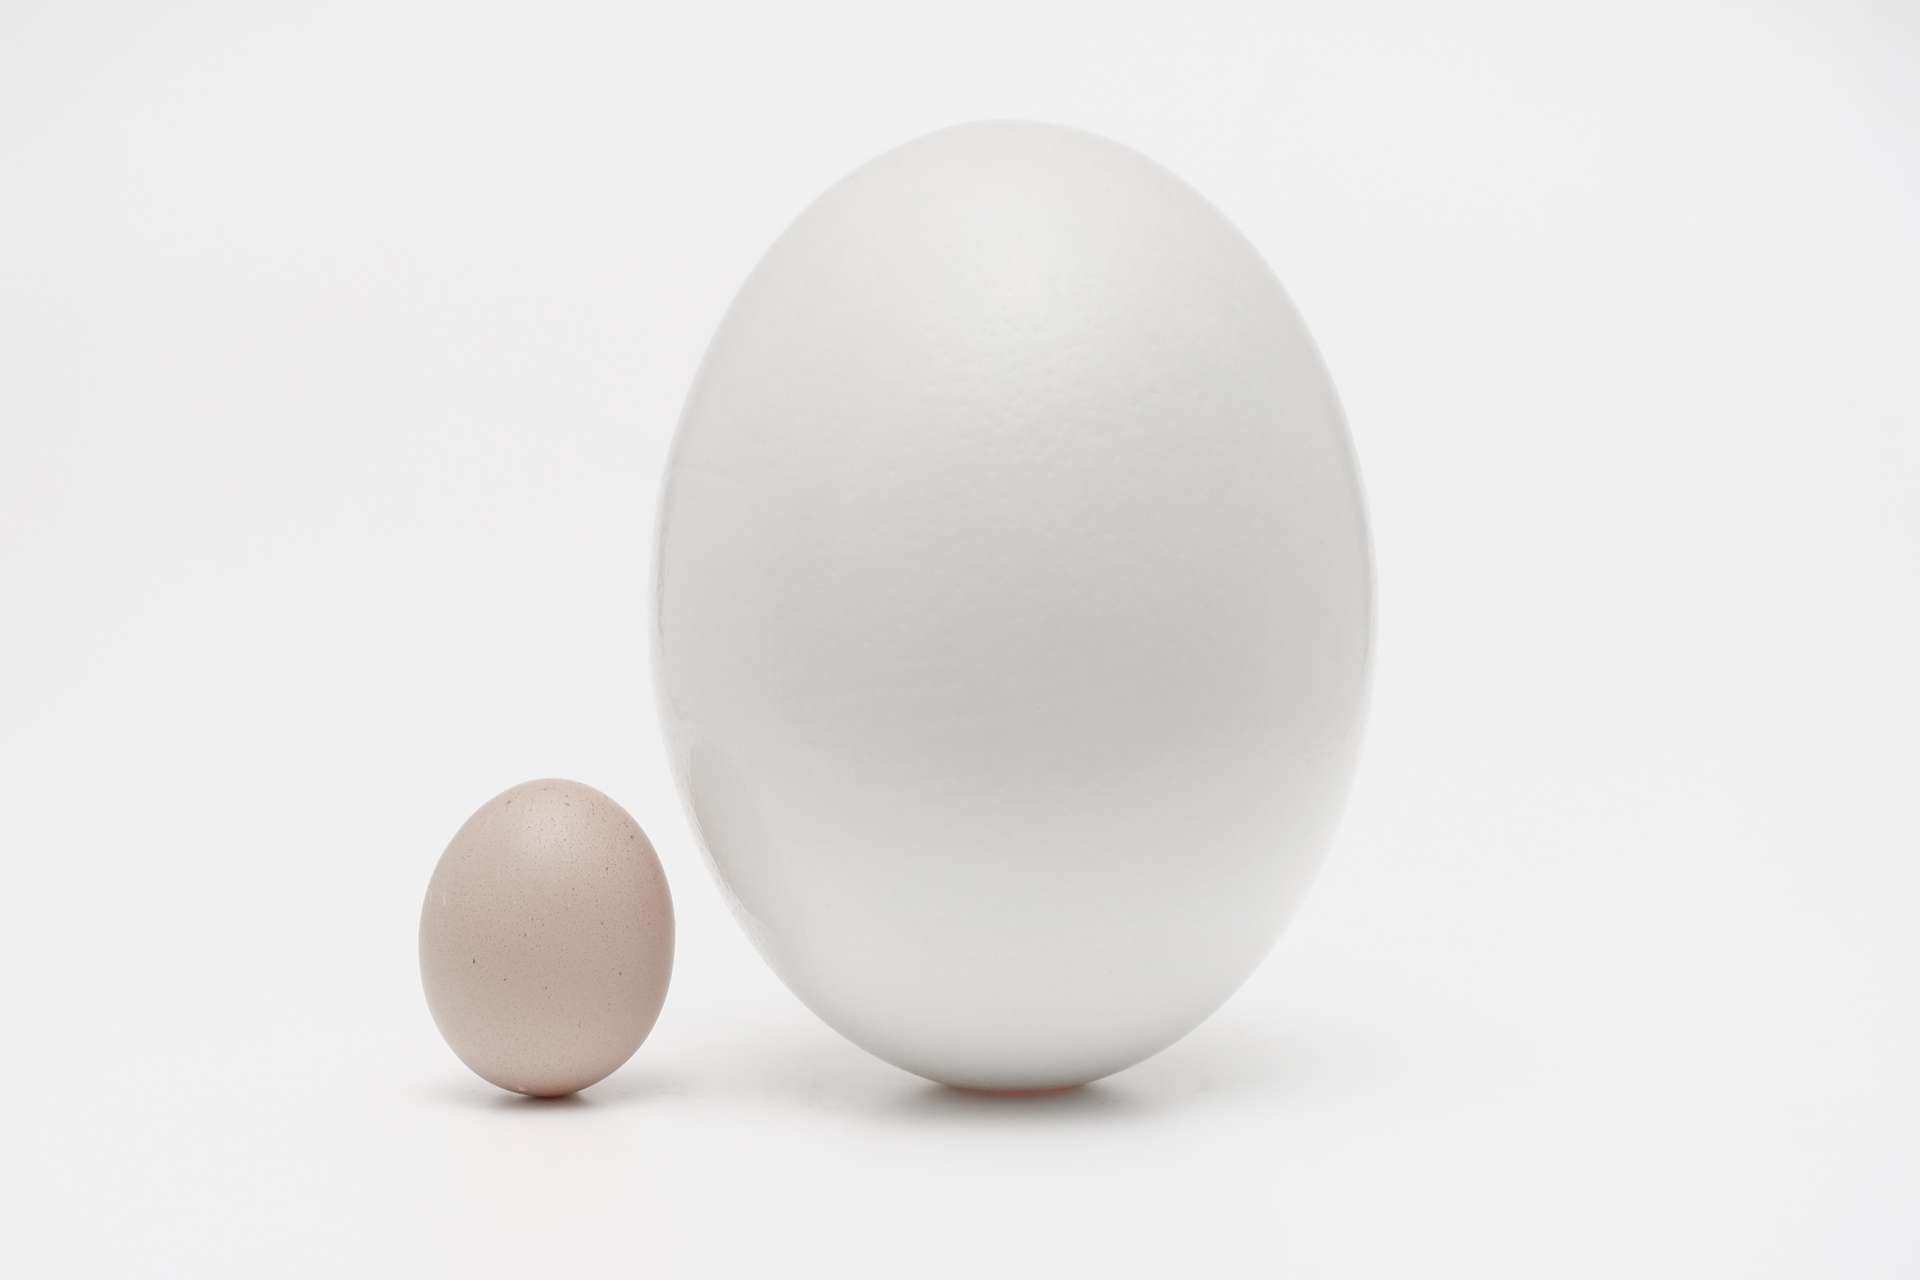 A big egg and a small egg